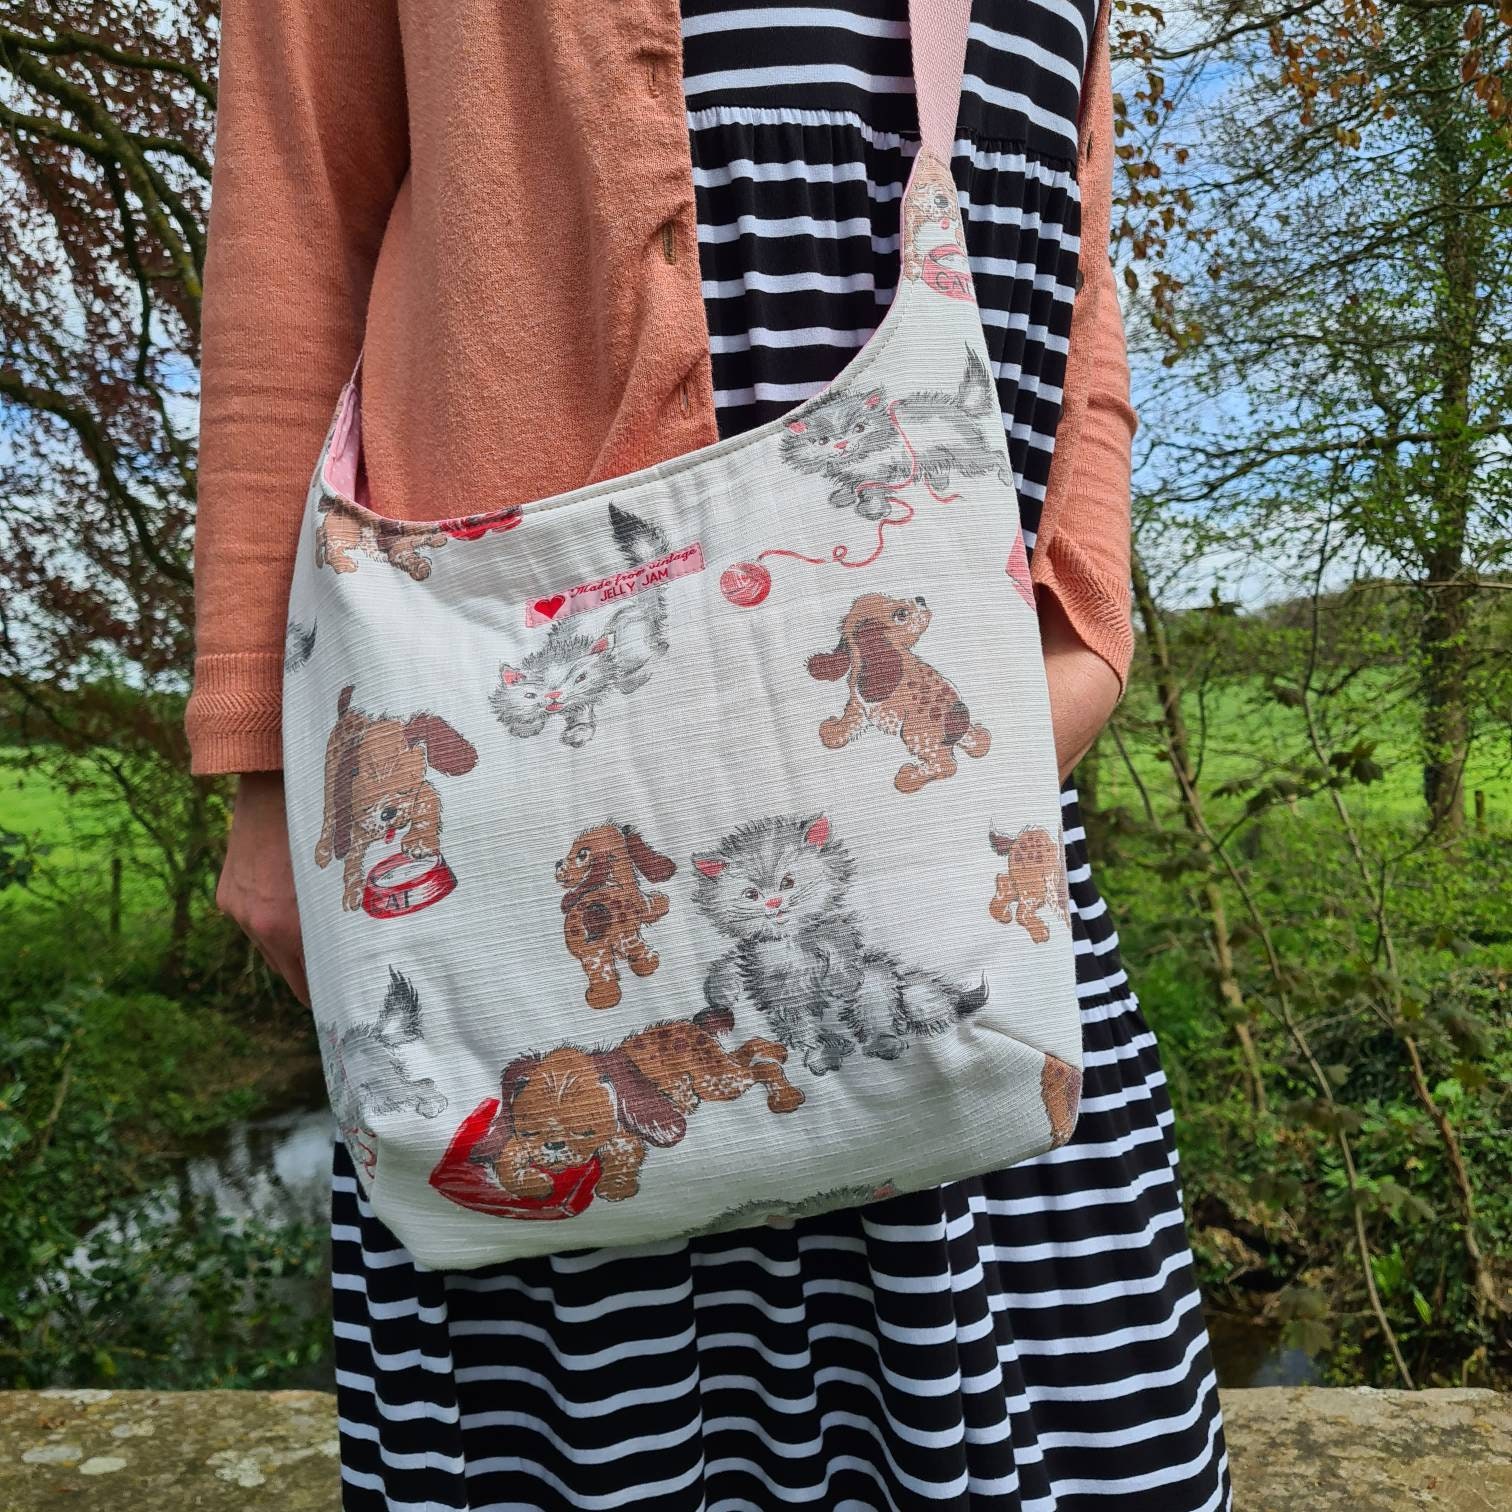 Extra Special - Vintage fabric slouchy cross body bag - puppies and kittens